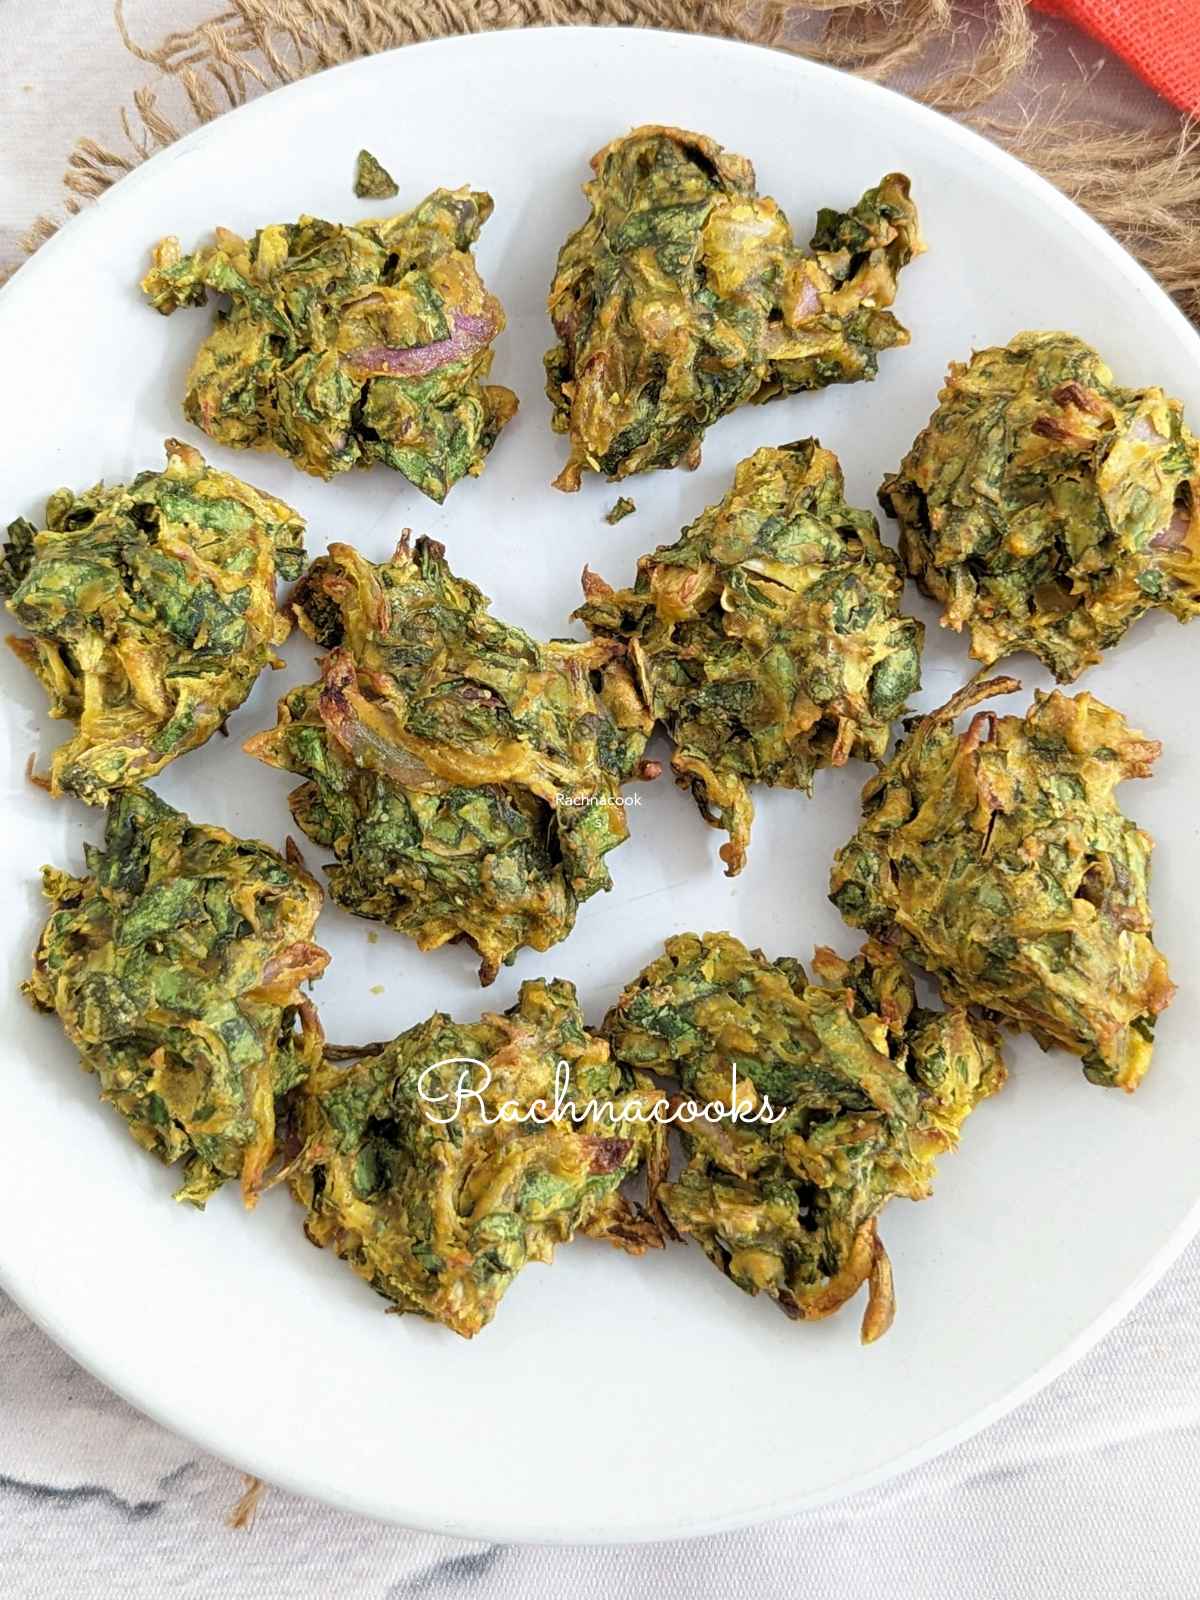 A plate of 10 spinach pakoras on a white plate.